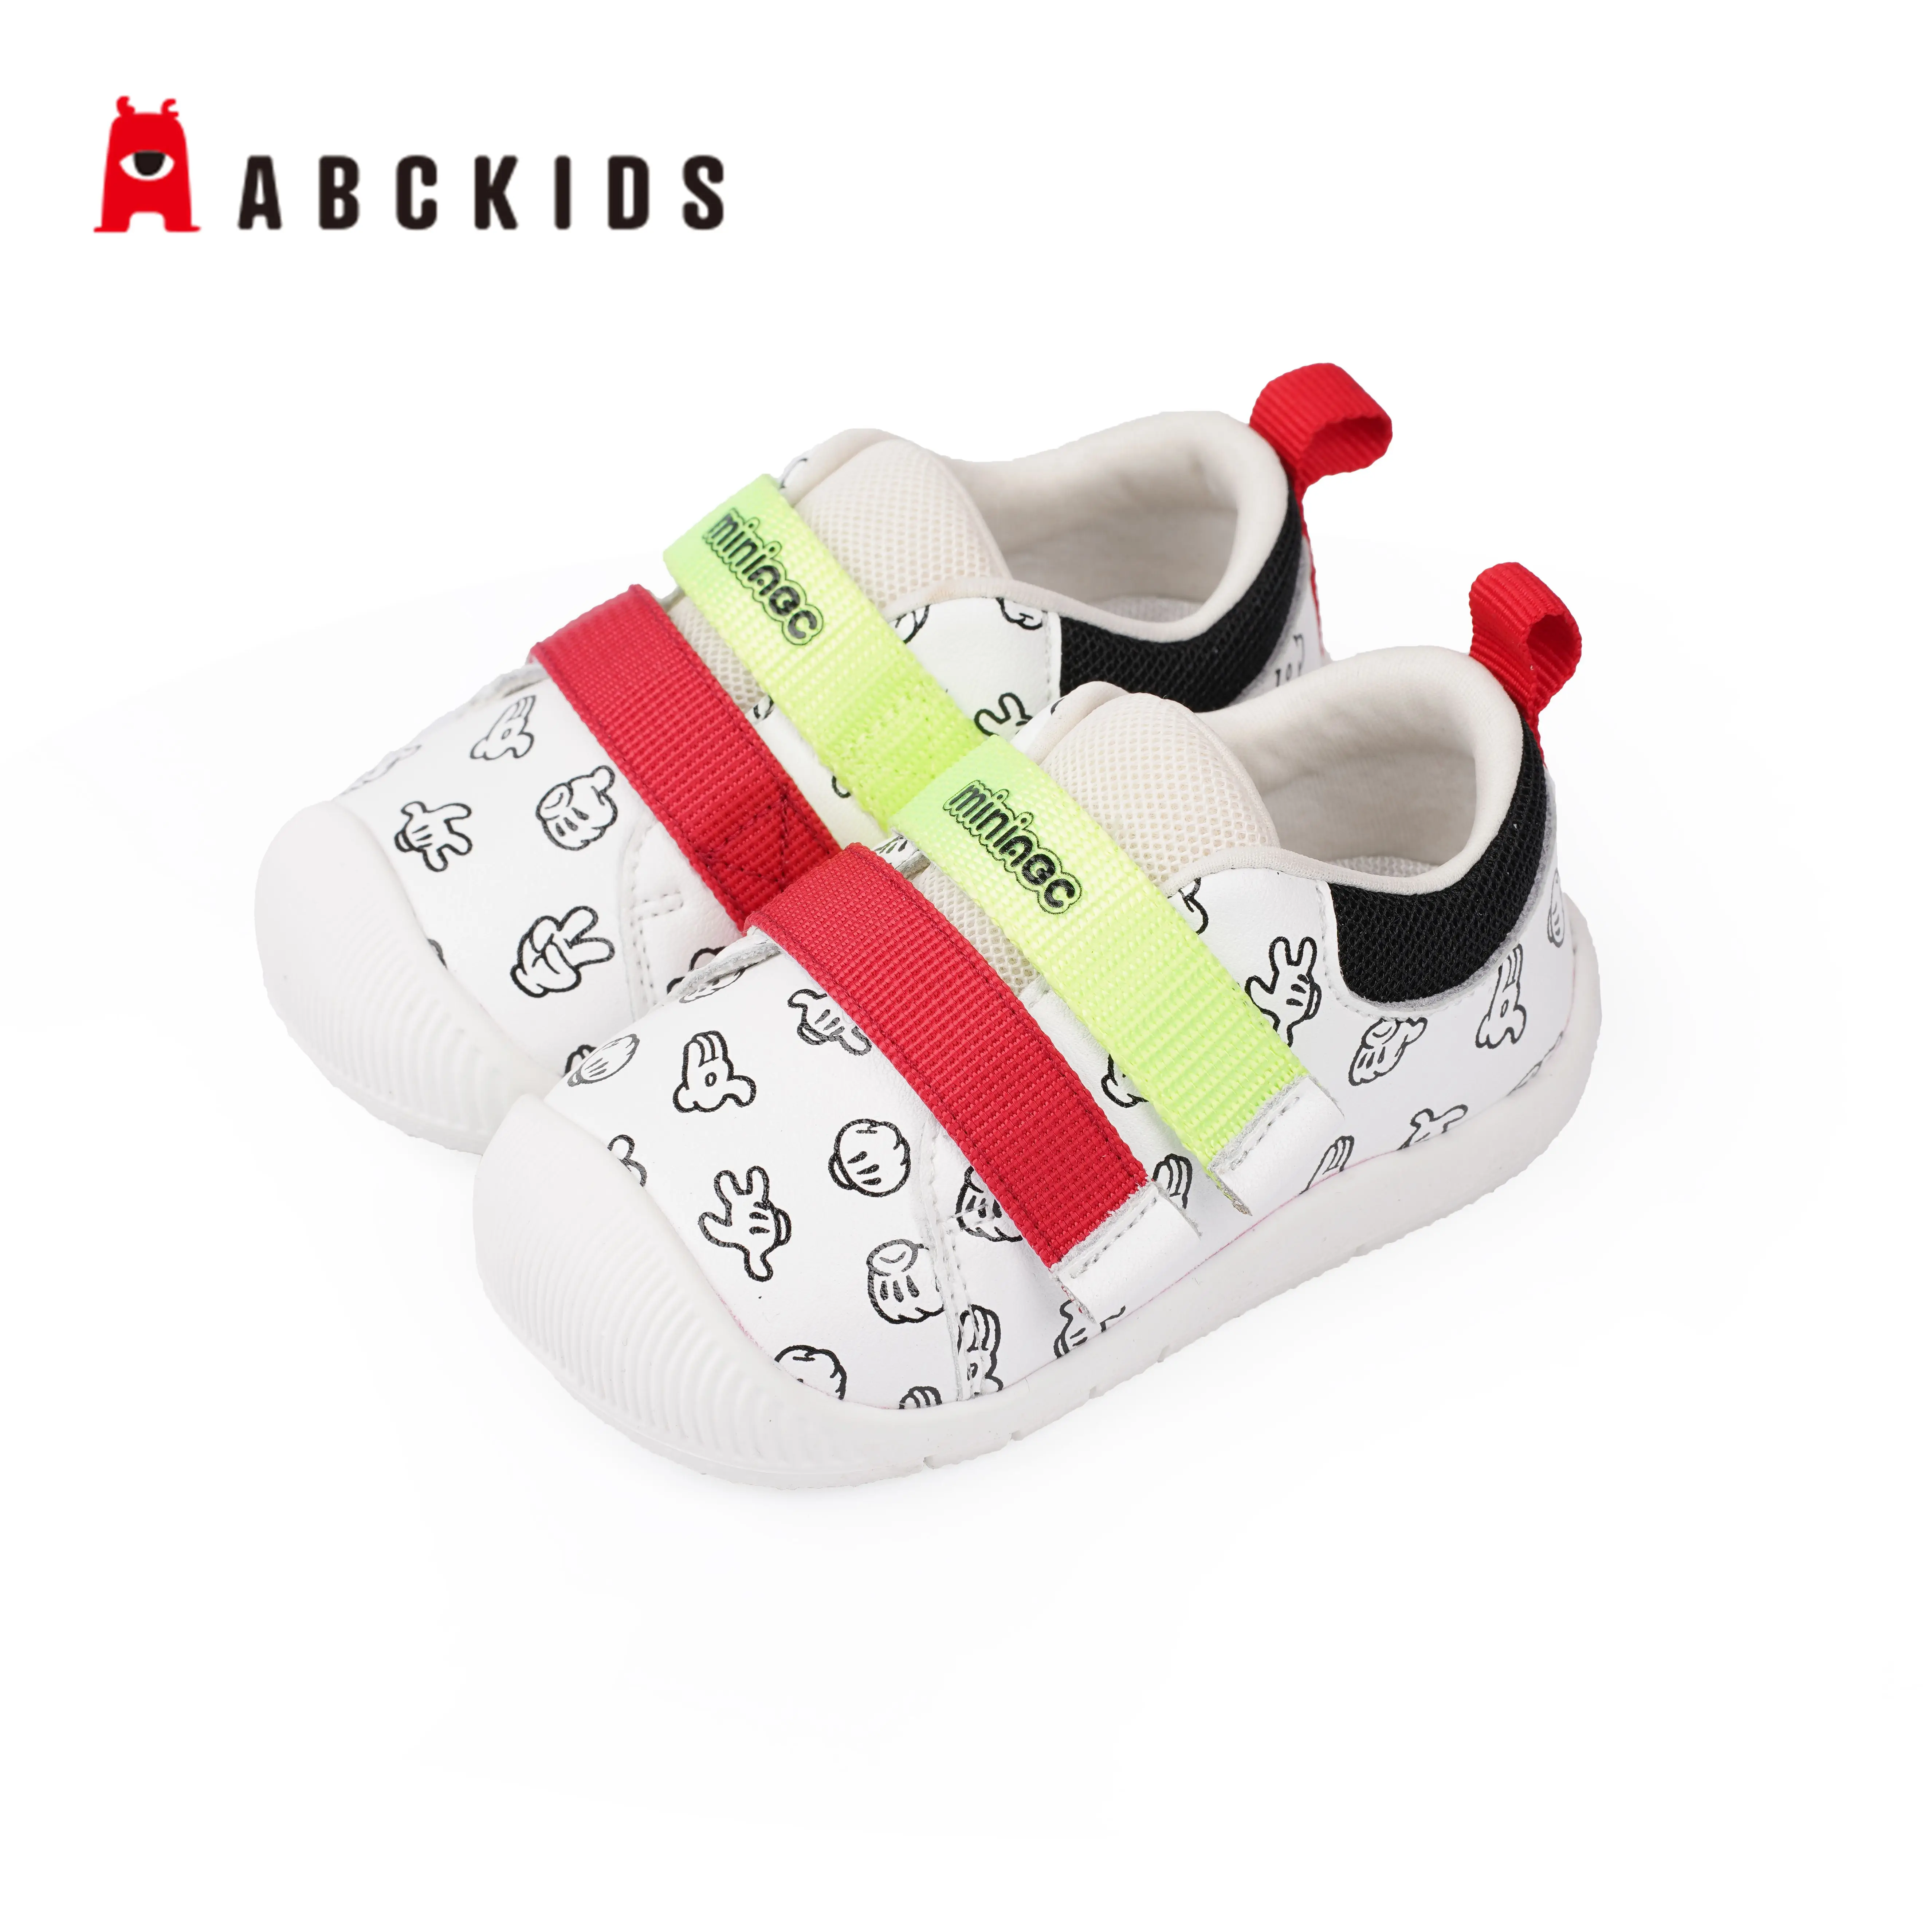 ABC KIDS High Quality Anti-slippery Breathable Cute Casual Prewalker Baby Shoes